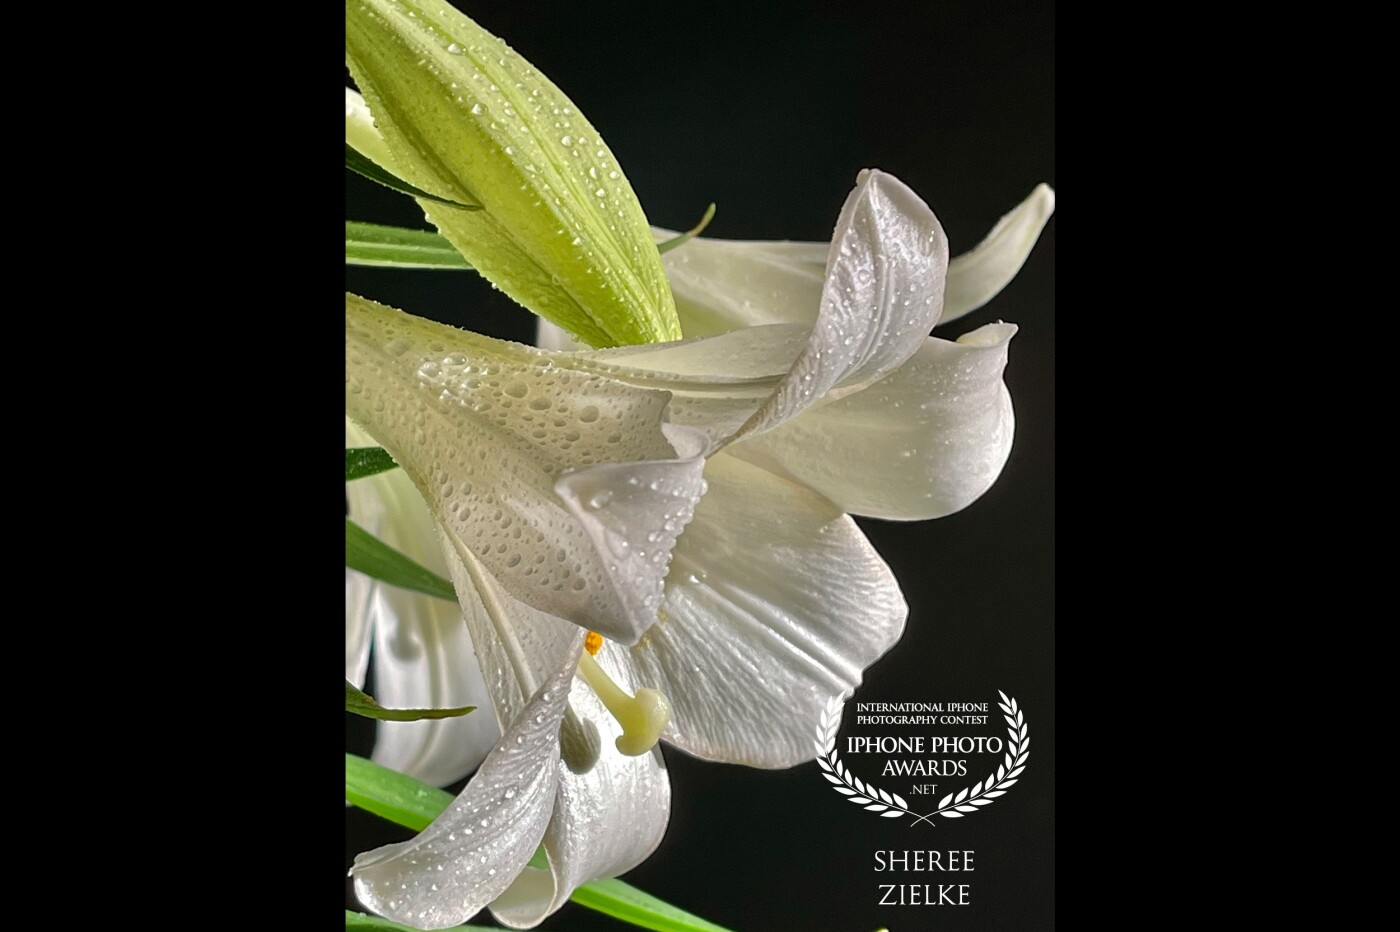 A friend gave me this Easter Lily. I had it on a dining table where it was caught up in the morning sunshine. I had to have the shot. I used black foam board to block out background clutter. And I misted with a plant spray bottle. I am glad others found this beautiful, too.